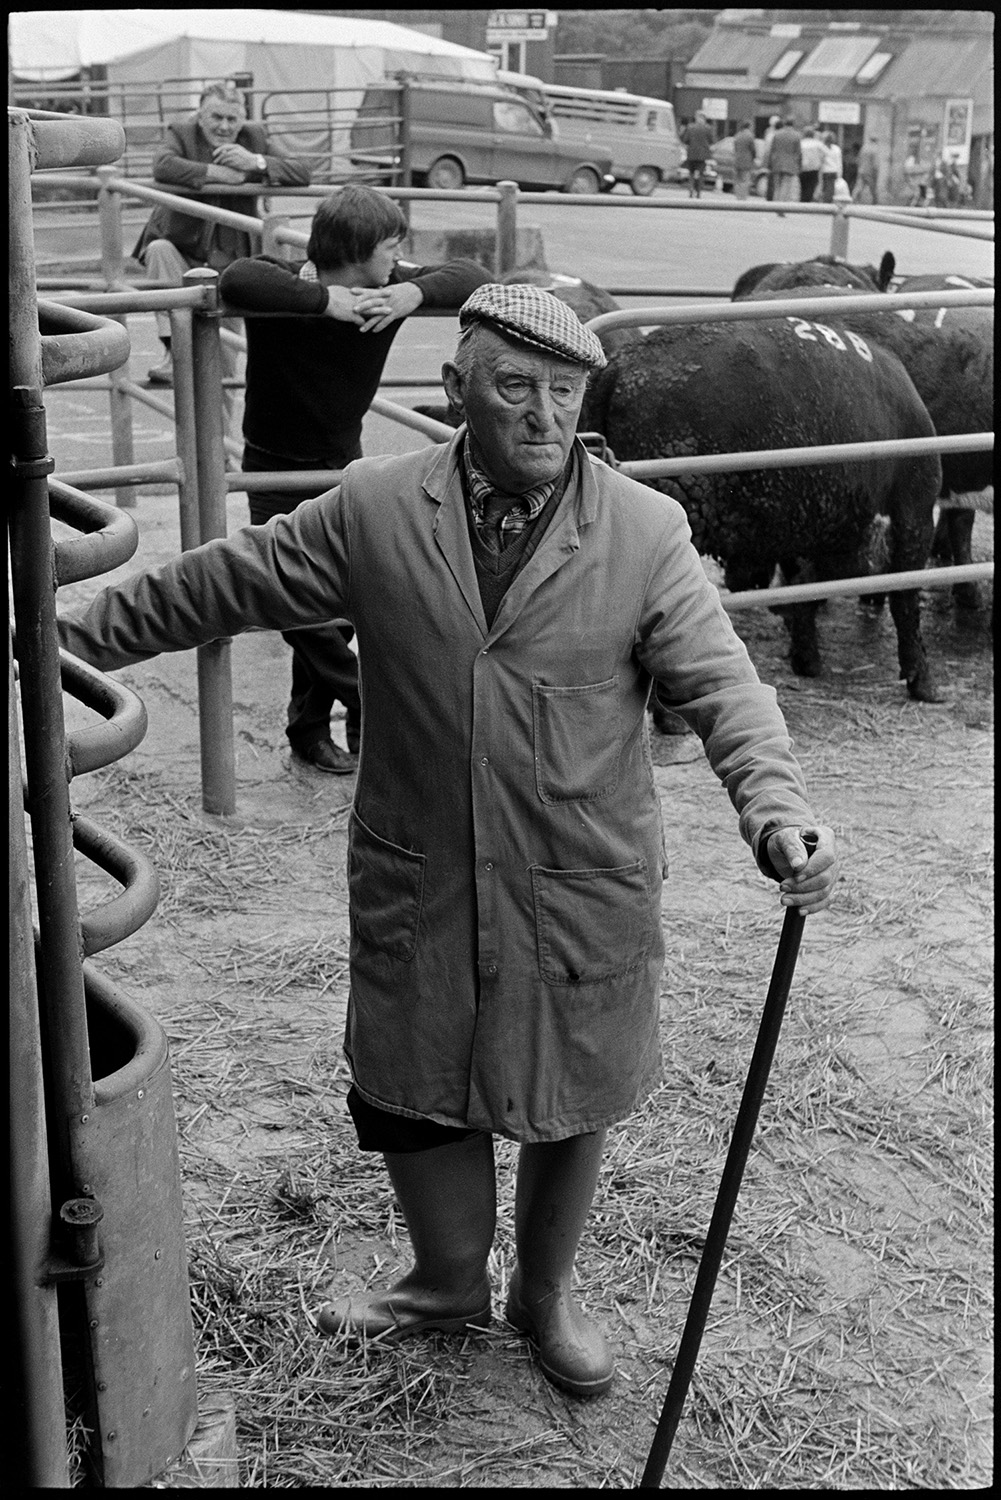 Farmers at cattle market auction ring. Calves. 
[A man wearing a flat cap and holding a stick stood by pens at a cattle auction at Holsworthy Market. Other people looking at cows in a pen are visible in the background.]